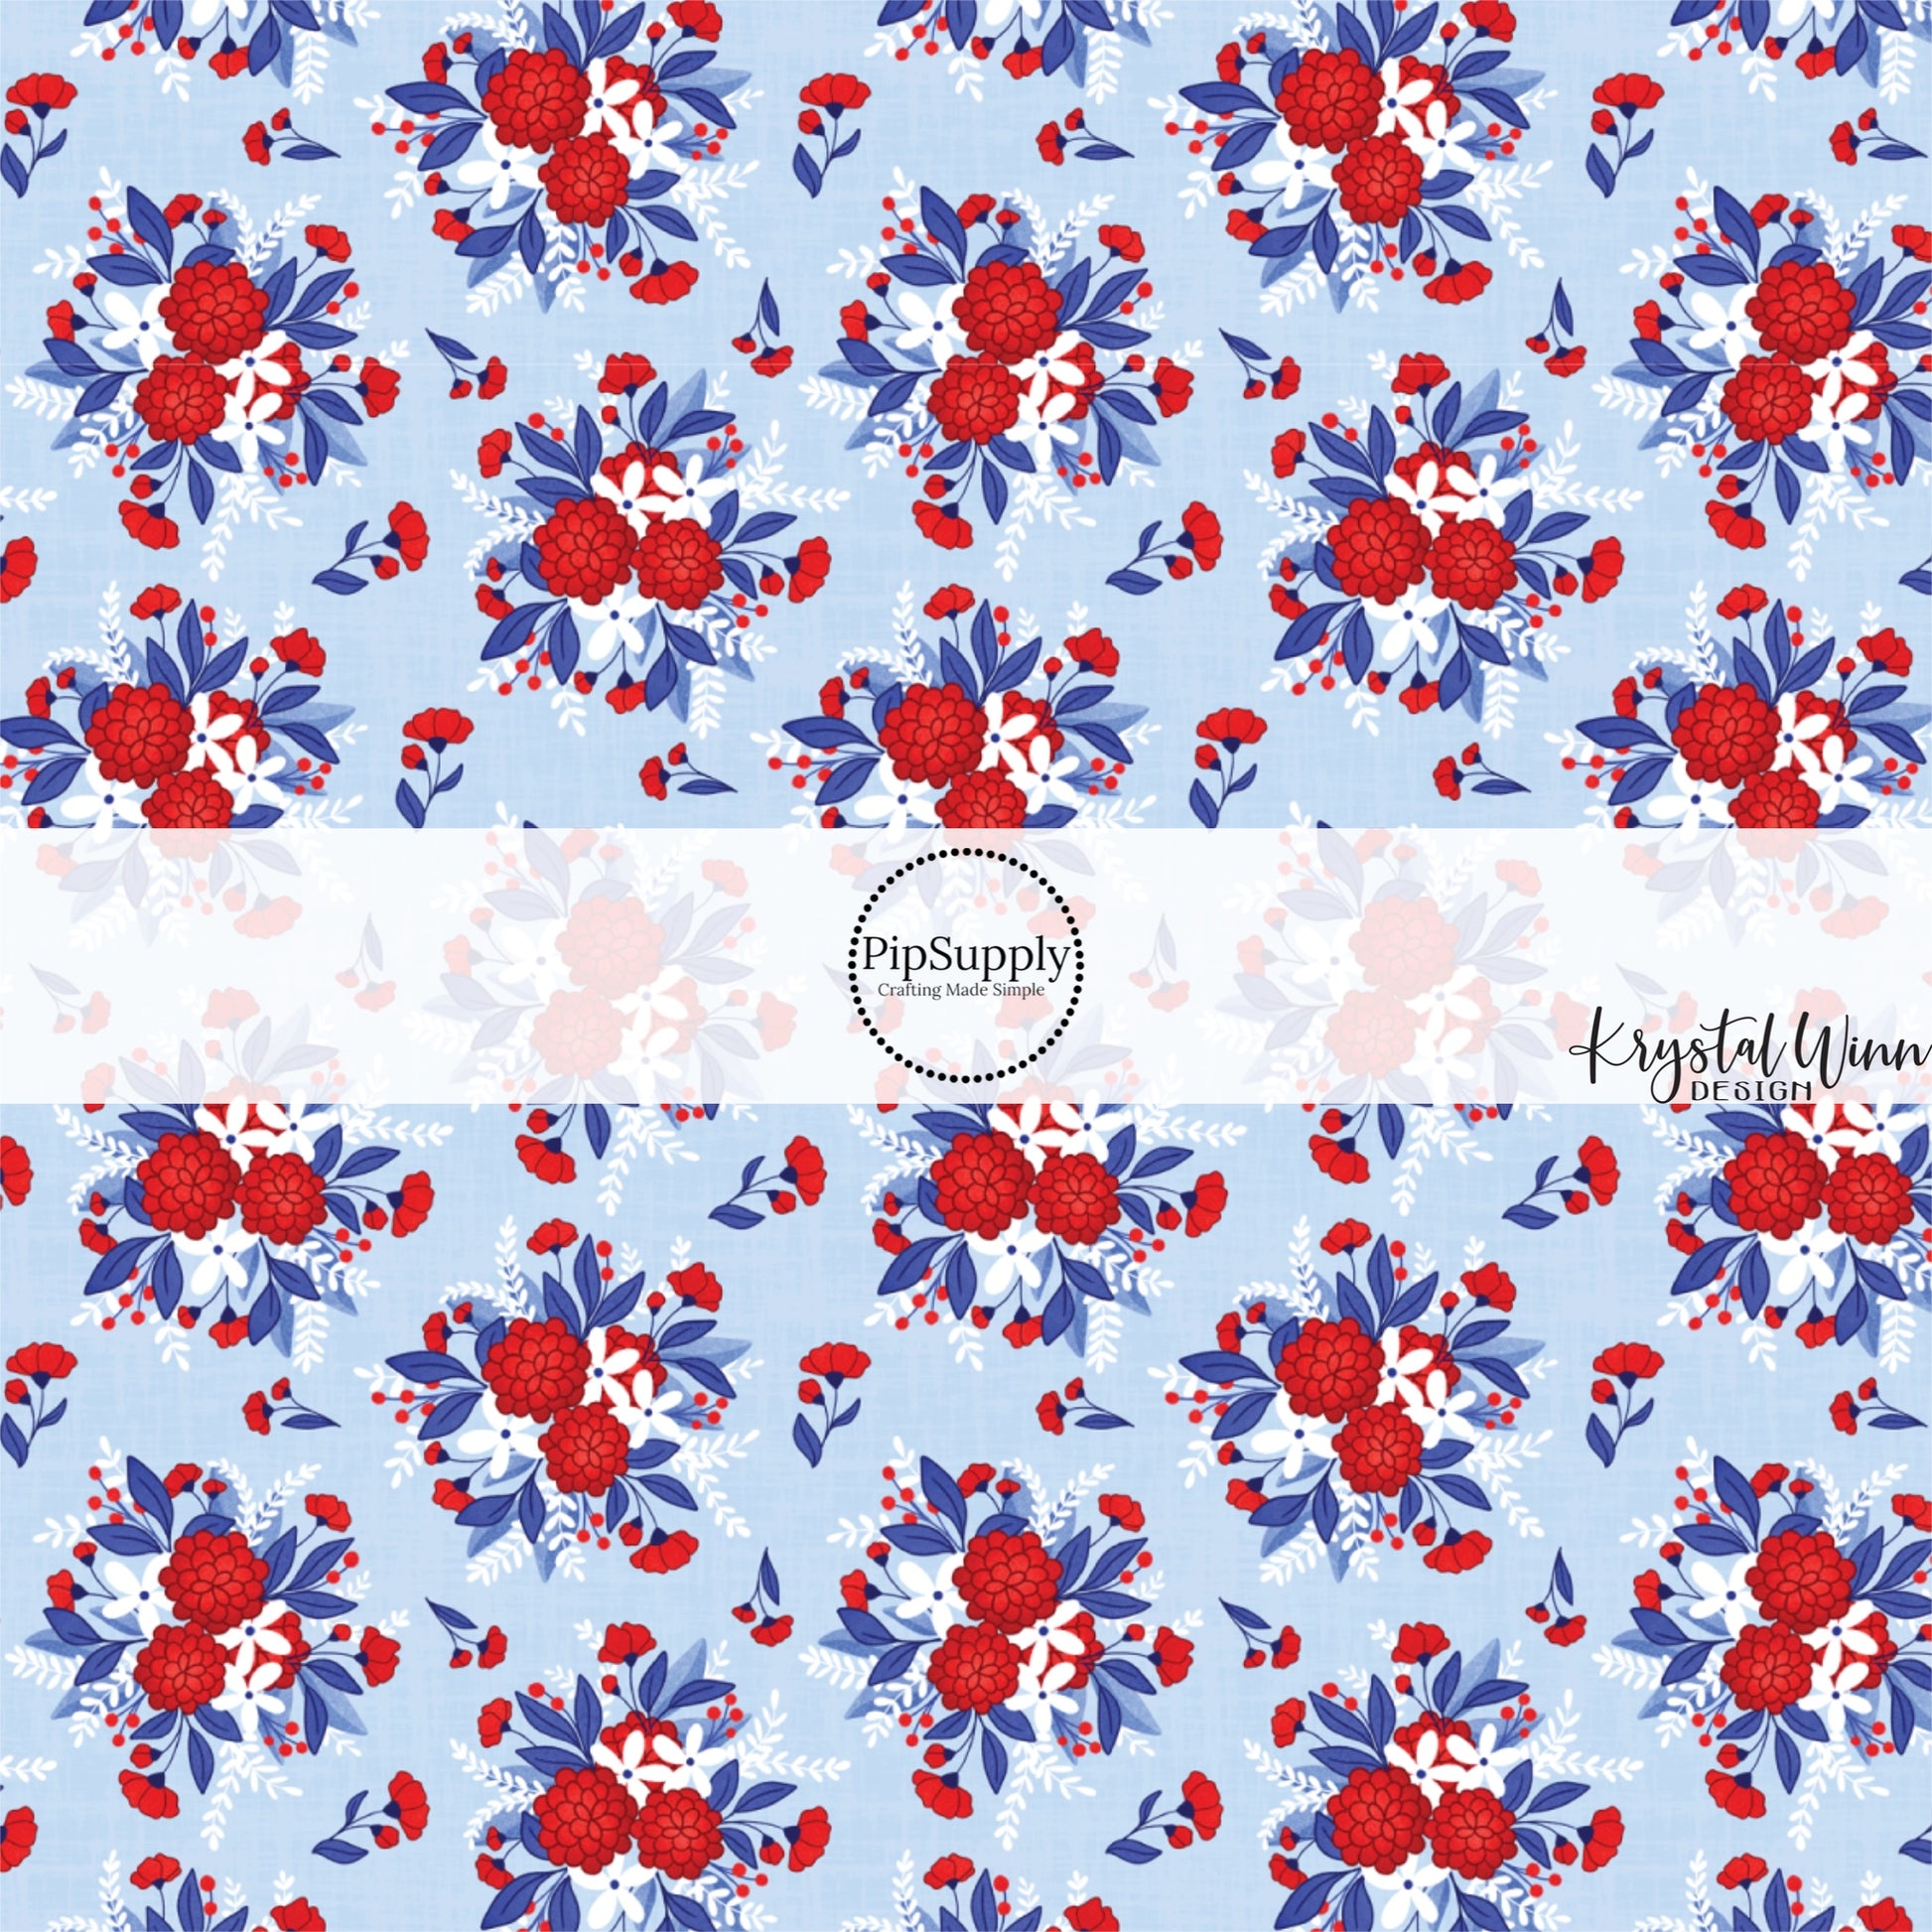 Patriotic Flowers In Blue, Red, and White On Light Blue Fabric By